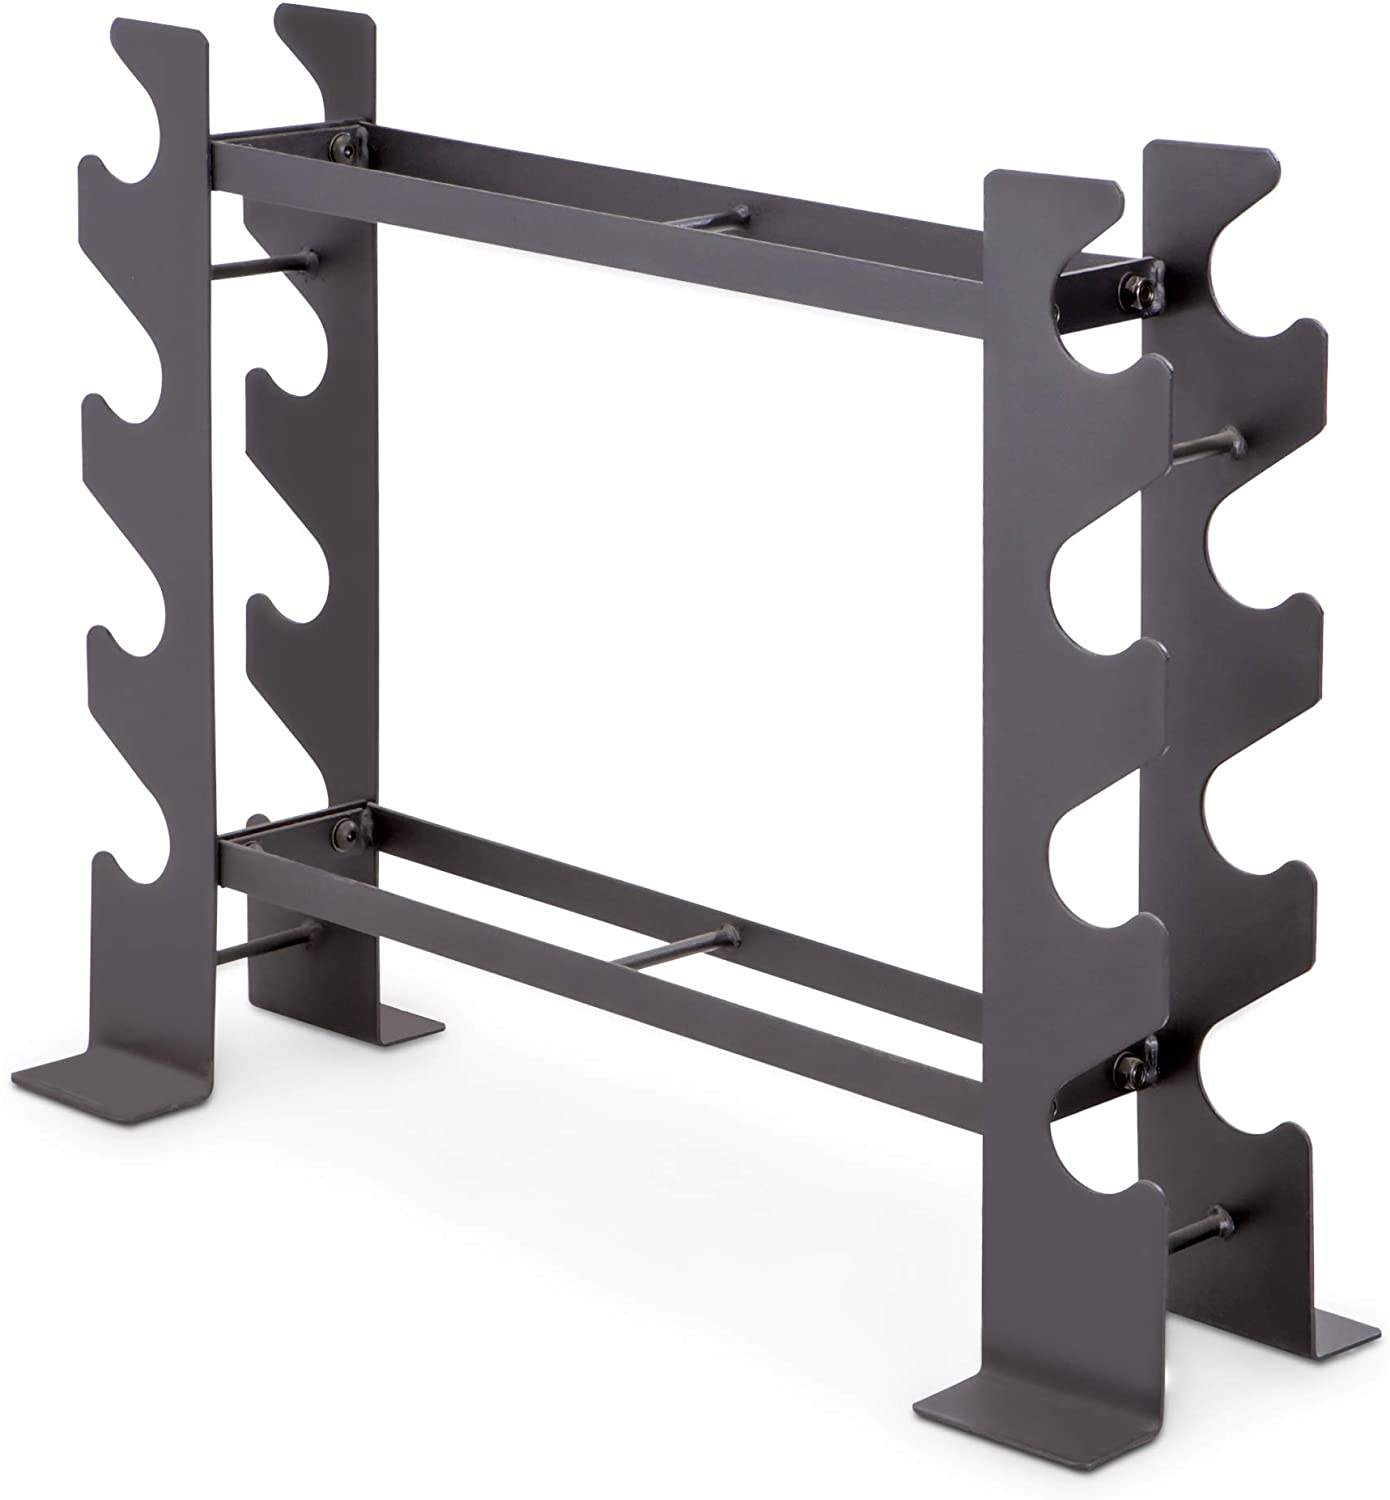 Marcy Compact Dumbbell Rack Free Weight Stand for Home Gym DBR-56, Steel - image 1 of 5